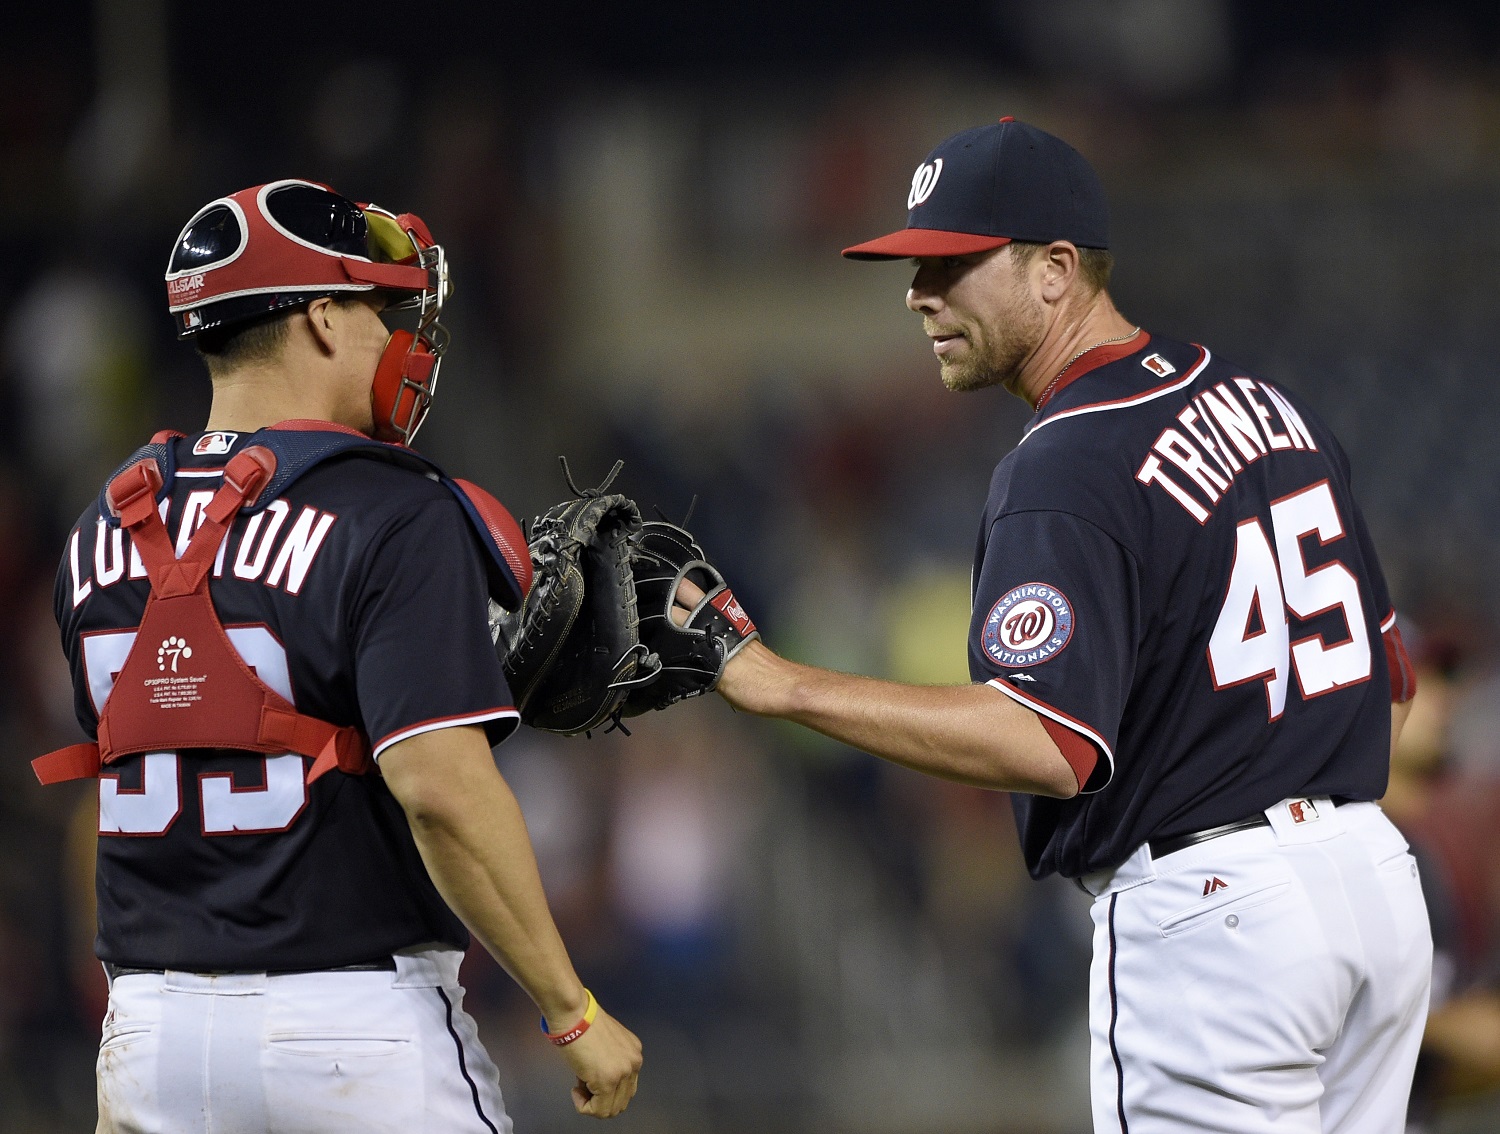 Washington Nationals relief pitcher Blake Treinen (45) celebrates with catcher Jose Lobaton (59) after the Nationals defeated the Minnesota Twins 8-4 in a baseball game Friday, April 22, 2016, in Washington. (AP Photo/Nick Wass)